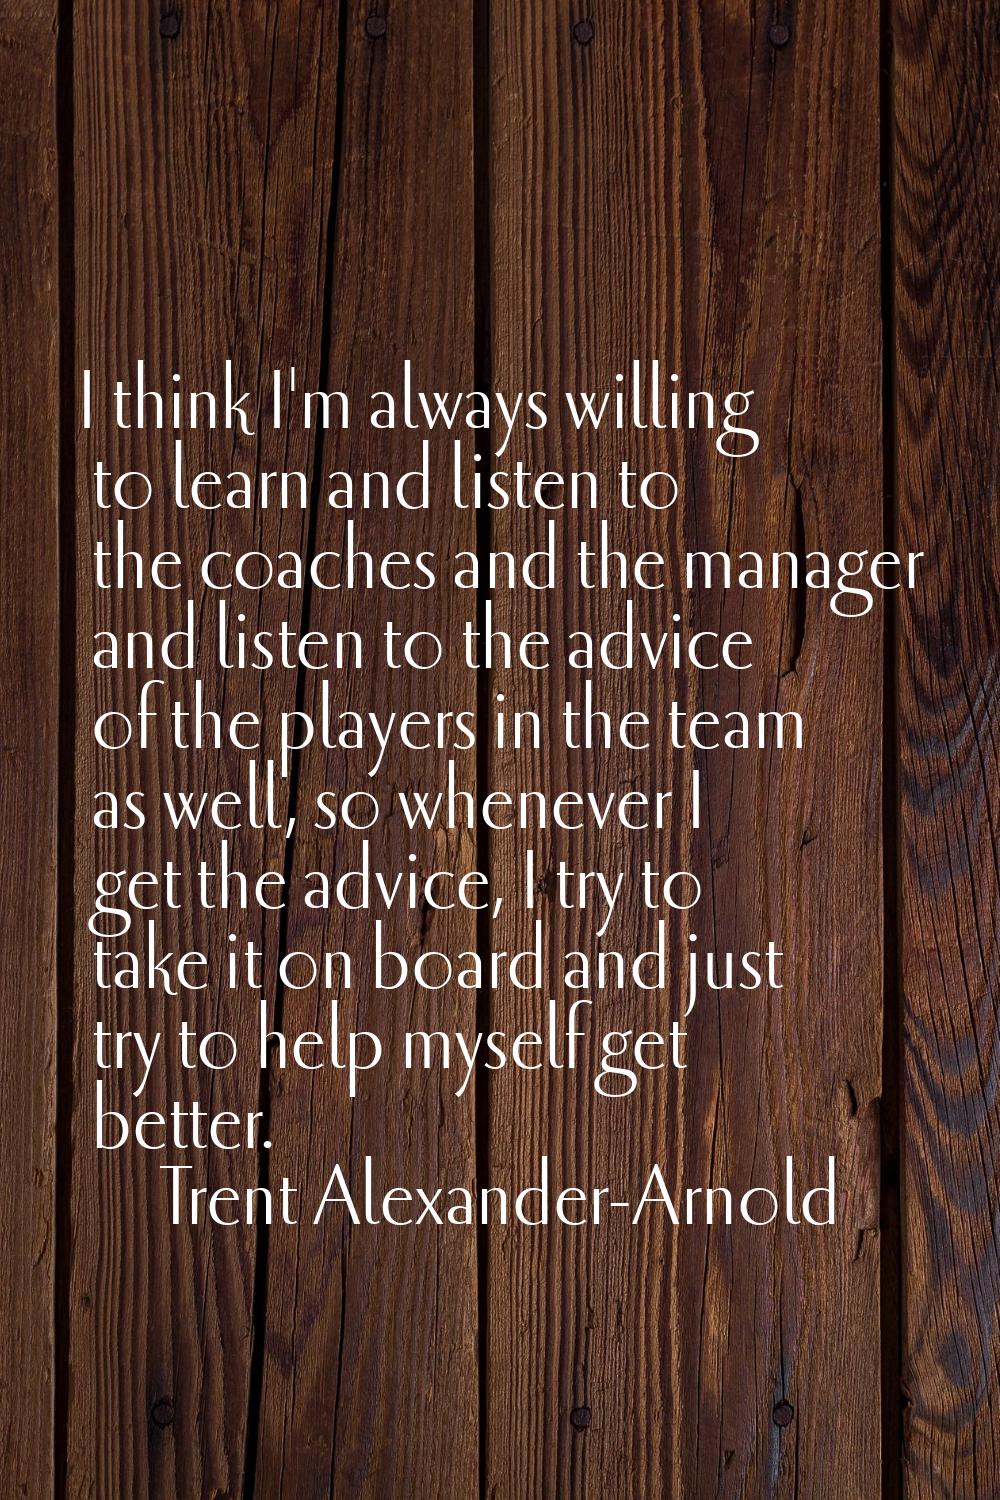 I think I'm always willing to learn and listen to the coaches and the manager and listen to the adv